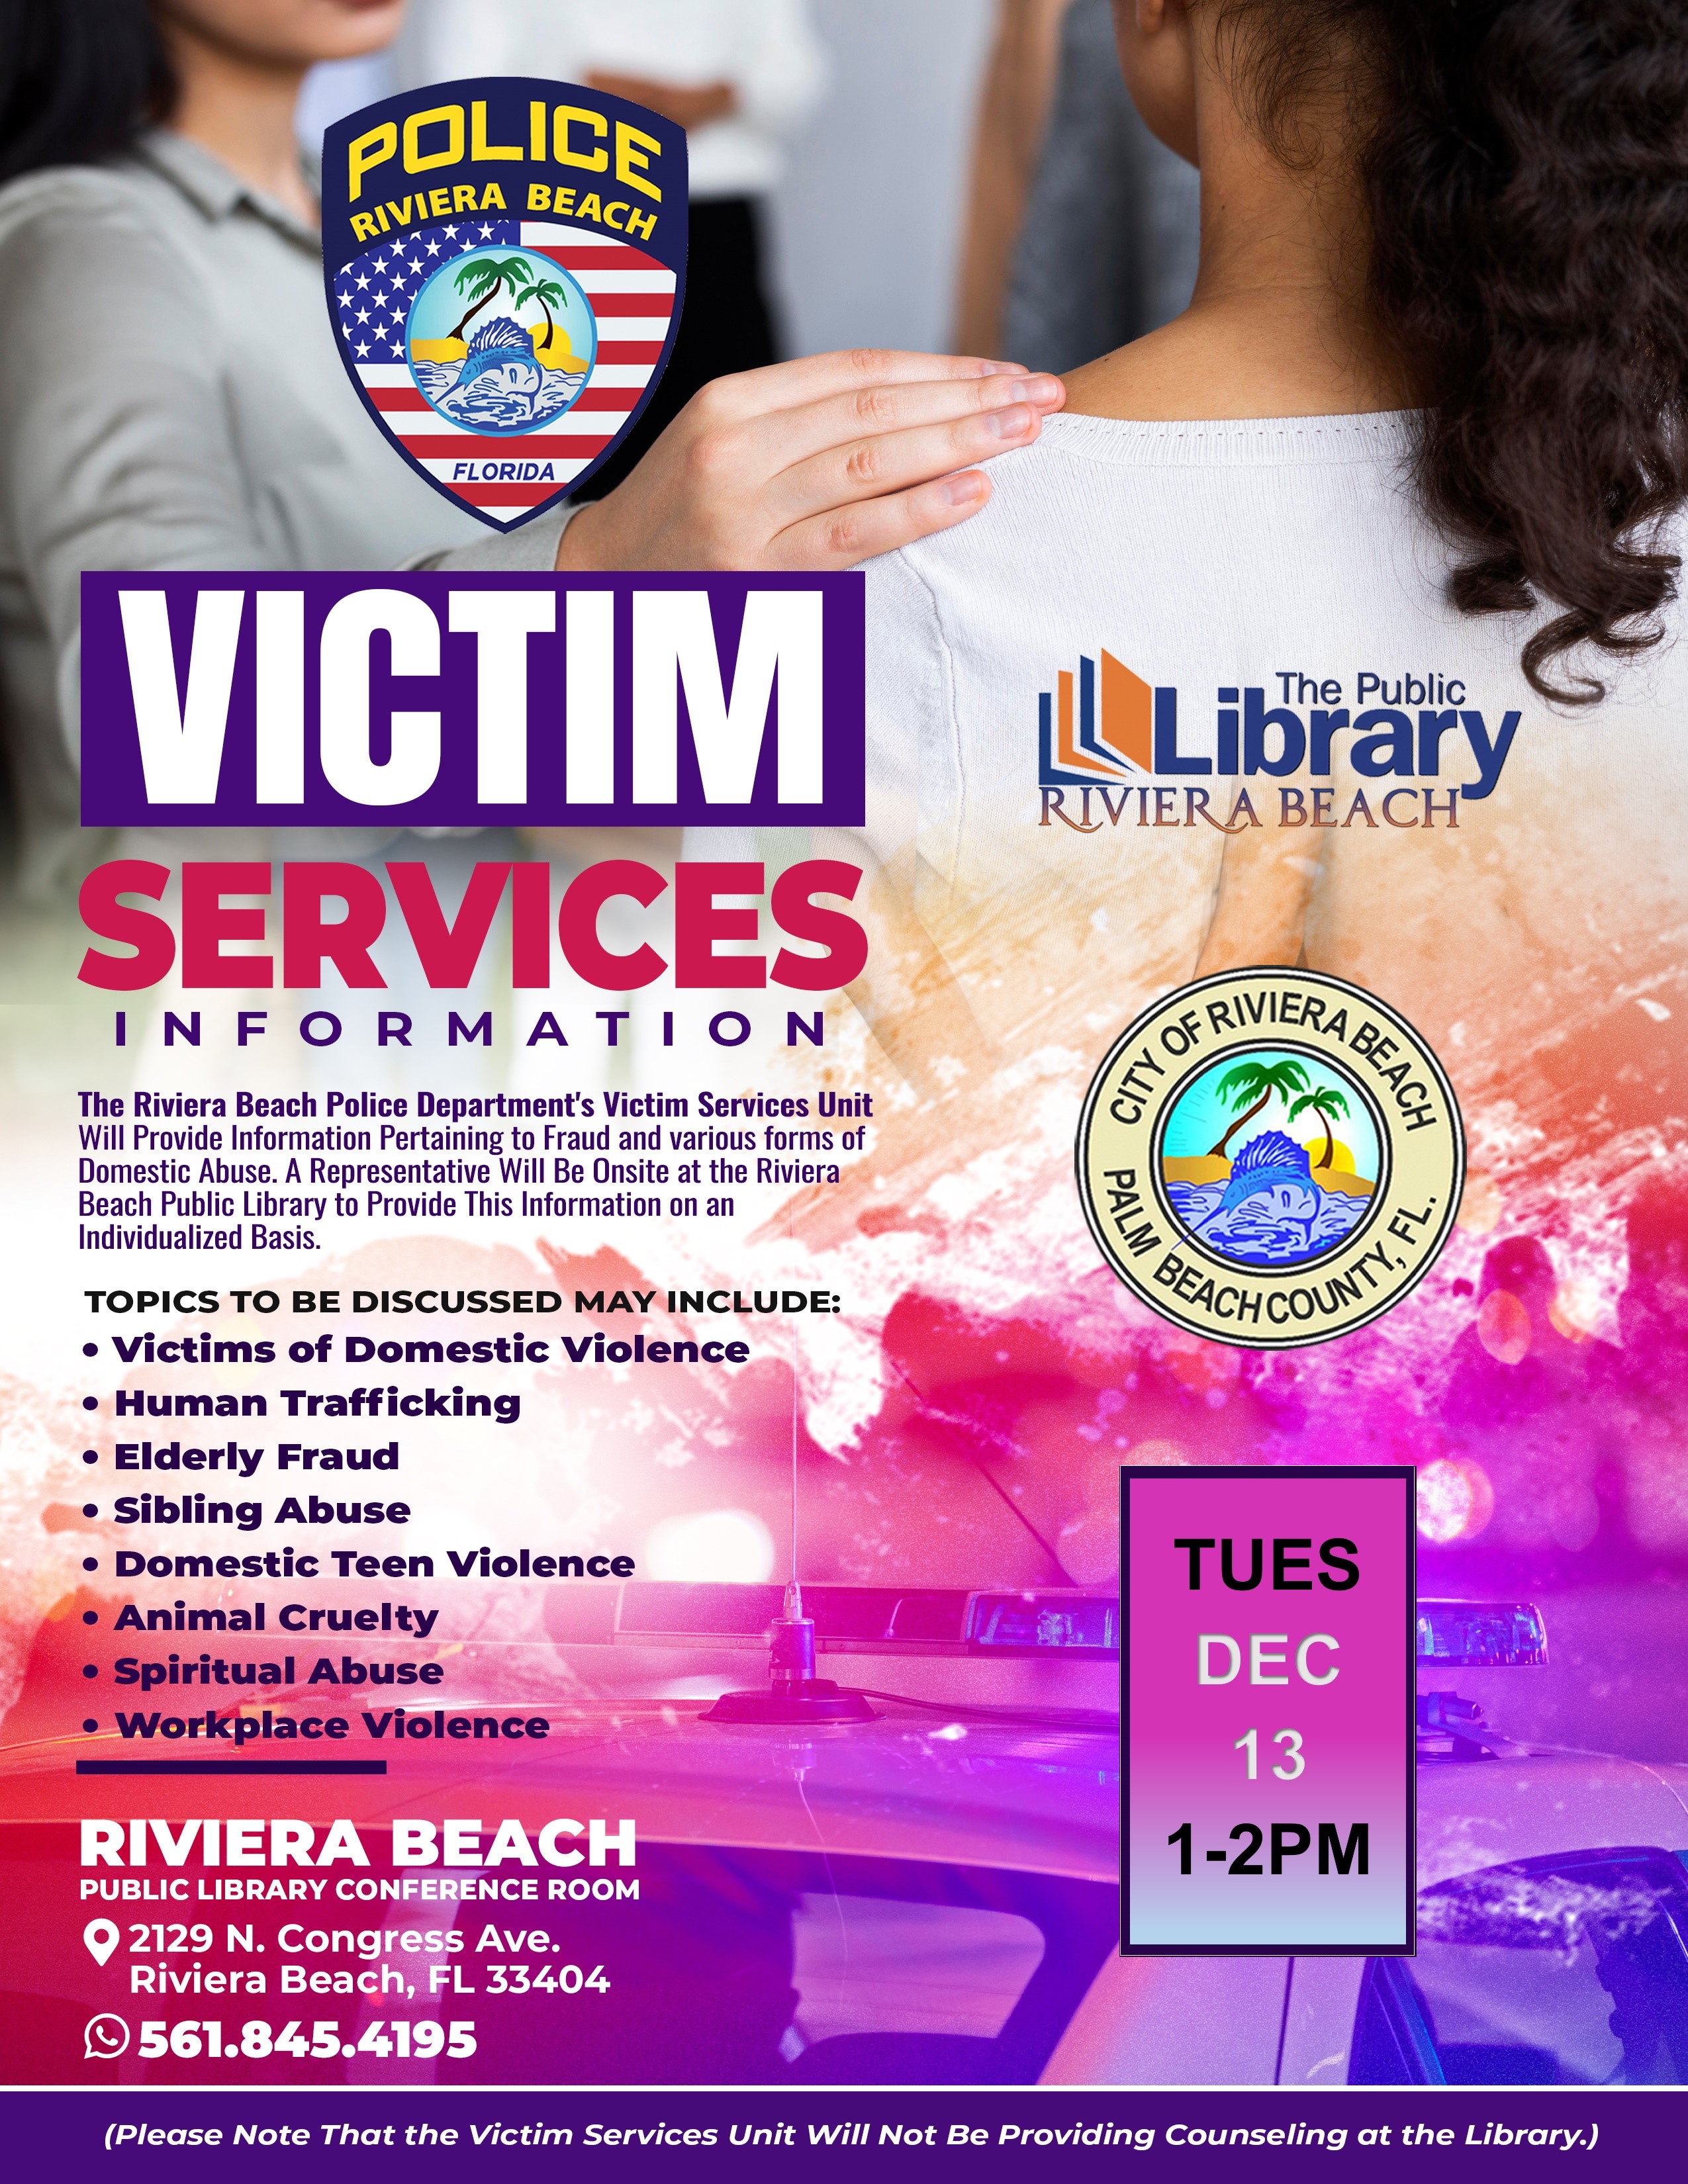 VICTIM RIVIERA BEACH SERVICES INFORMATION The Riviera Beach Police Department's Victim Services Unit Will Provide Information Pertaining to Fraud and various forms of Domestic Abuse. A Representative Will Be Onsite at the Riviera Beach Public Library to Provide This Information on an Individualized Basis. TOPICS TO BE DISCUSSED MAY INCLUDE: • Victims of Domestic Violence • Human Trafficking • Elderly Fraud • Sibling Abuse • Domestic Teen Violence • Animal Cruelty • Spiritual Abuse • Workplace Violence REICHCOUS, TUES DEC 13 RIVIERA BEACH PUBLIC LIBRARY CONFERENCE ROOM © 2129 N. Congress Ave. Riviera Beach, FL 33404 ©561.845.4195